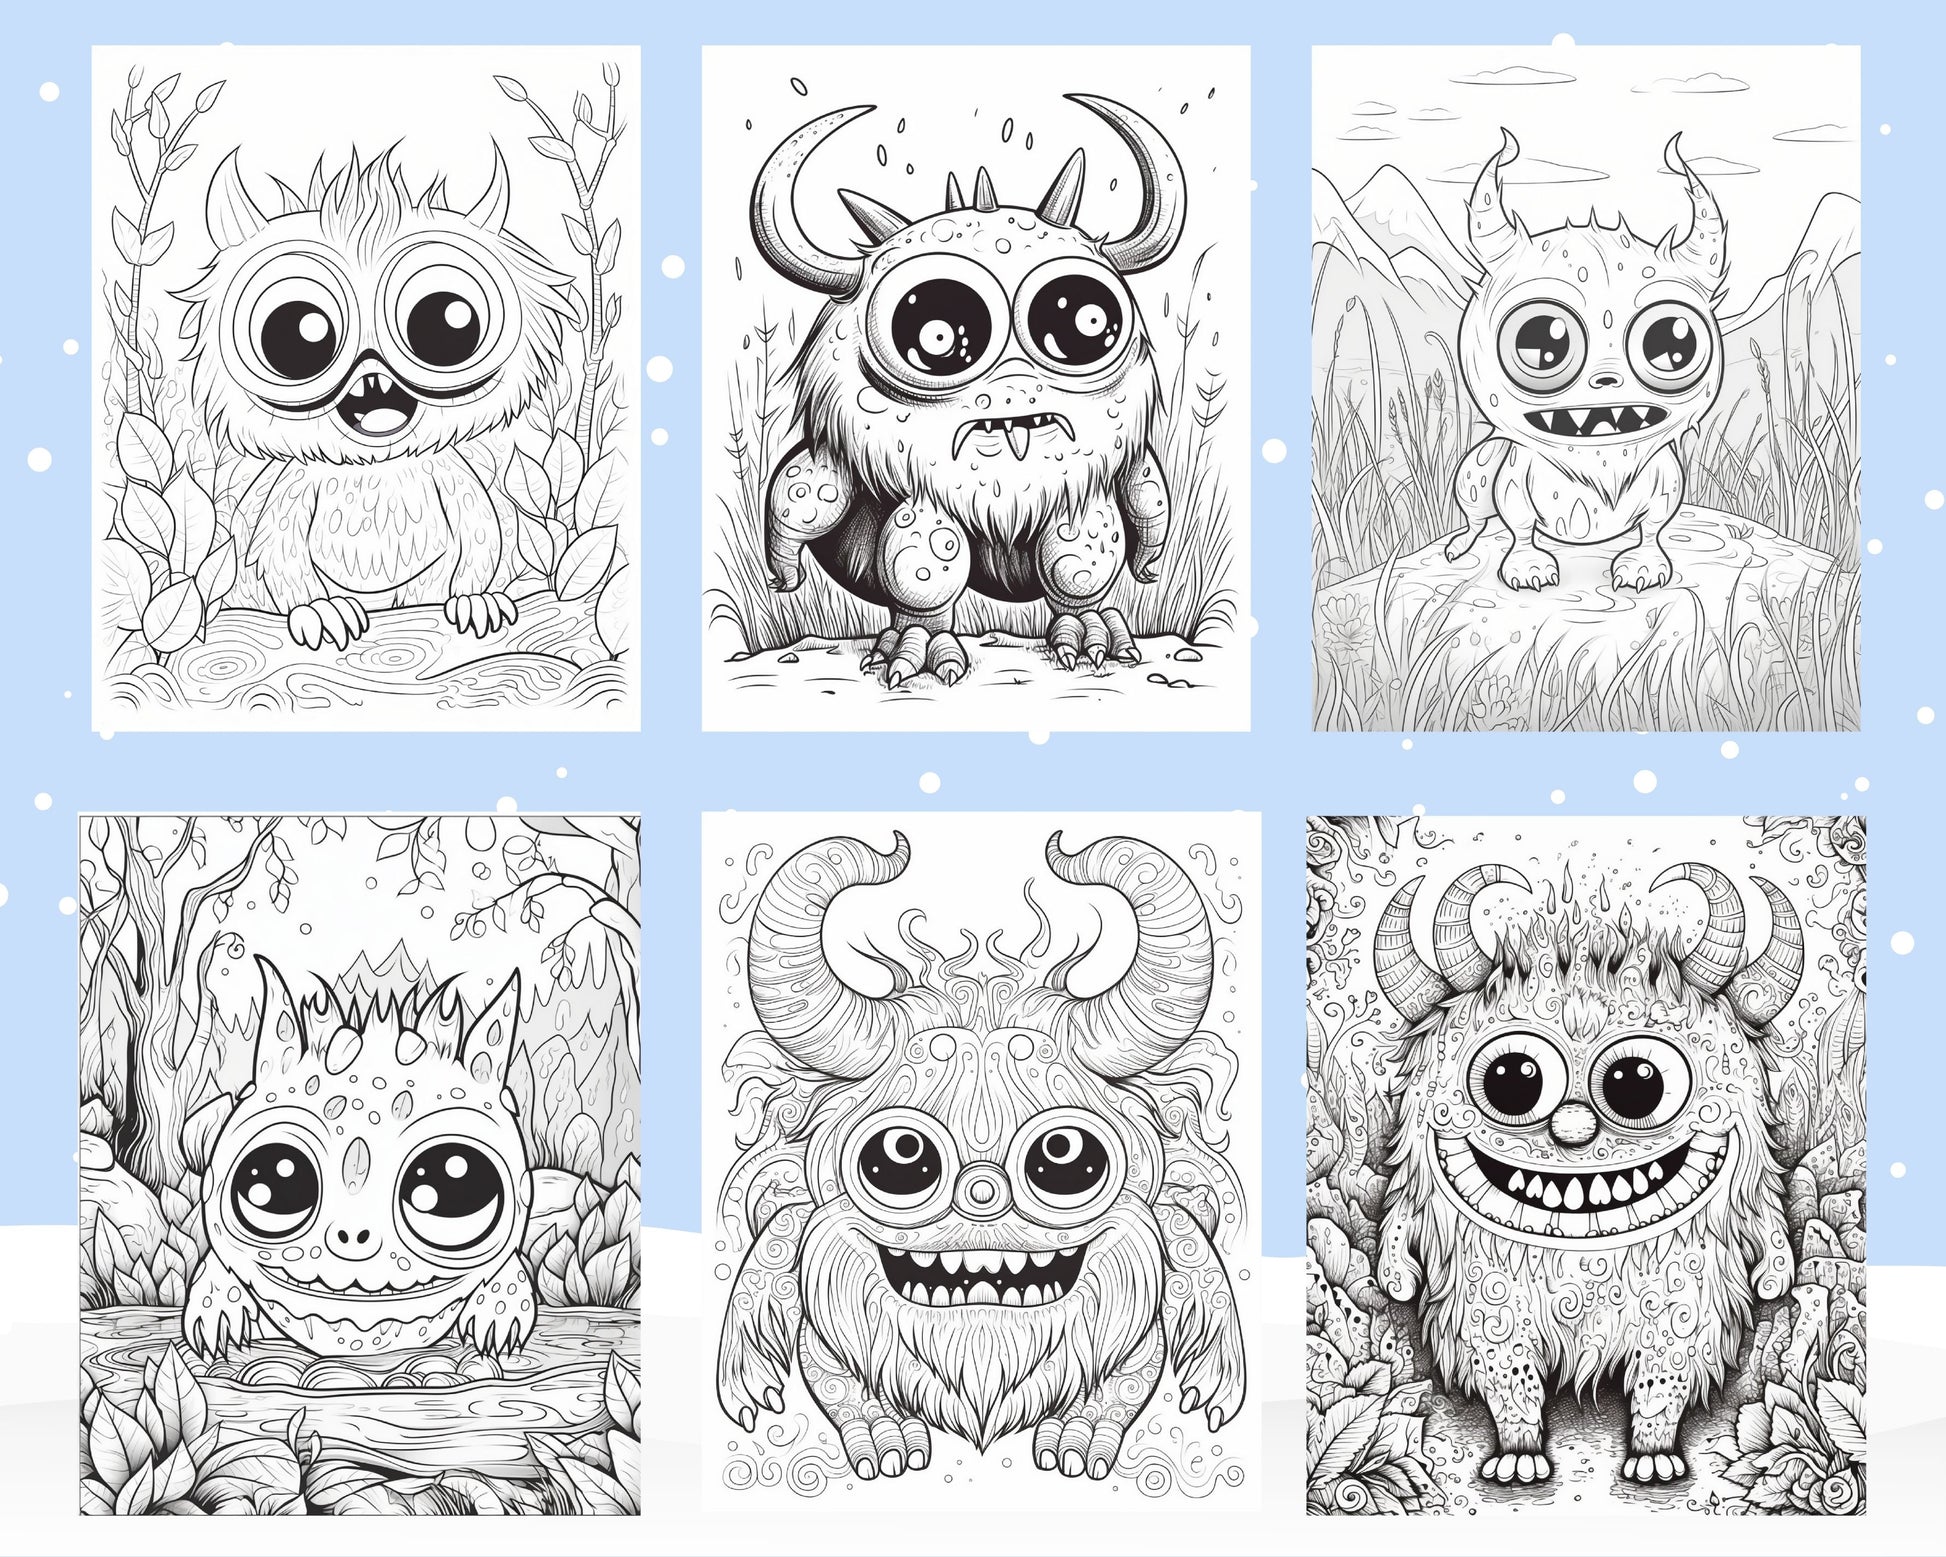 64 Adorable Monster Printable Coloring Pages for Kids, Printable PDF File Instant Download - raspiee